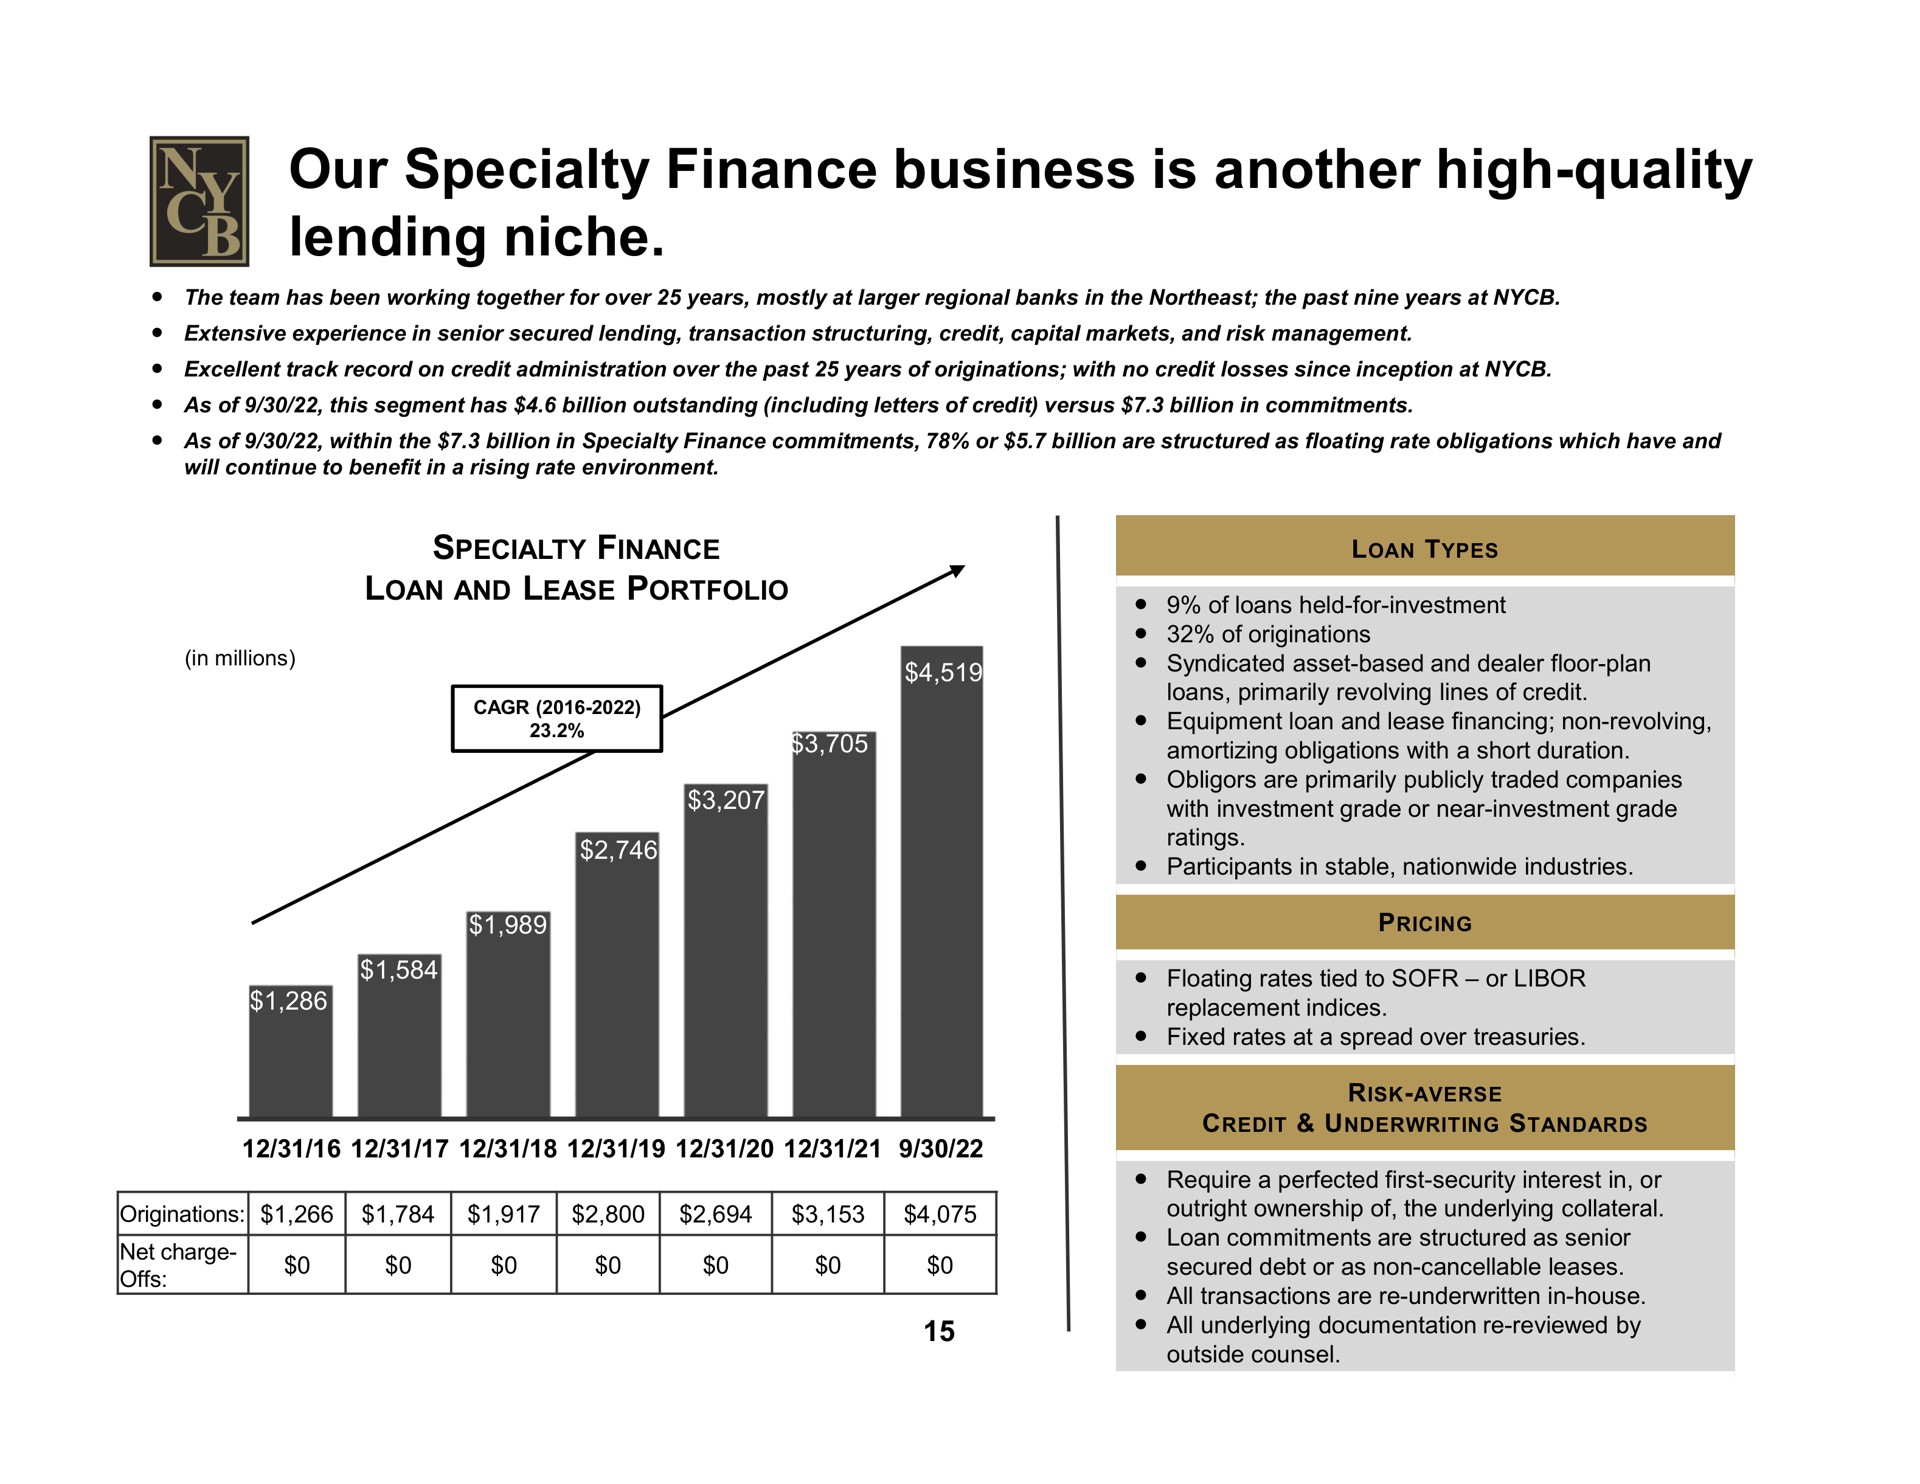 our specialty finance business is another high quality lending niche | New York Community Bancorp